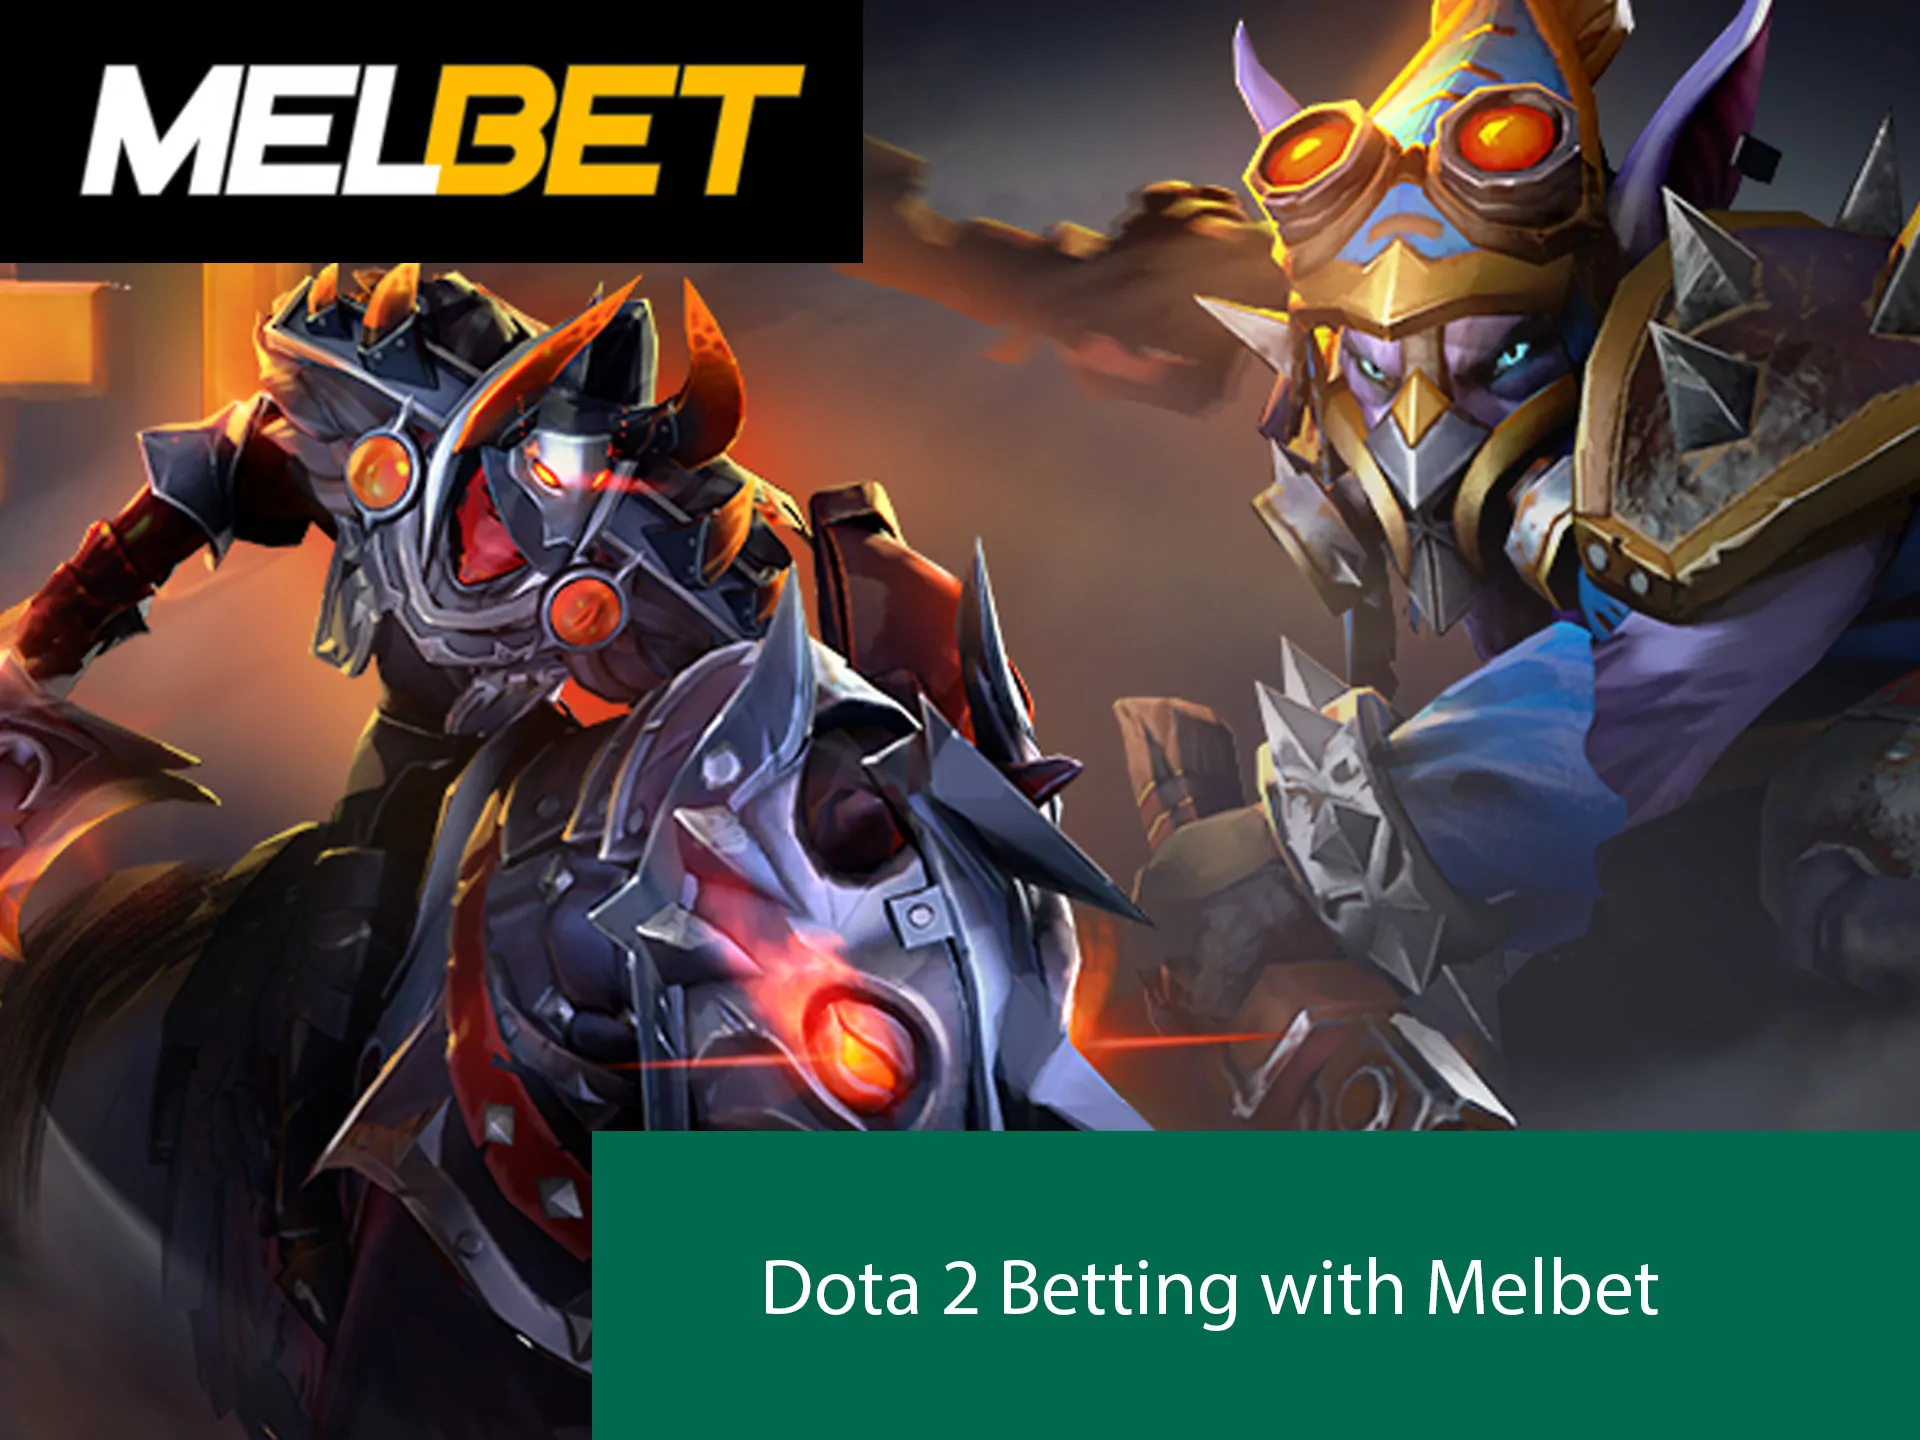 Melbet include the eSports betting feature